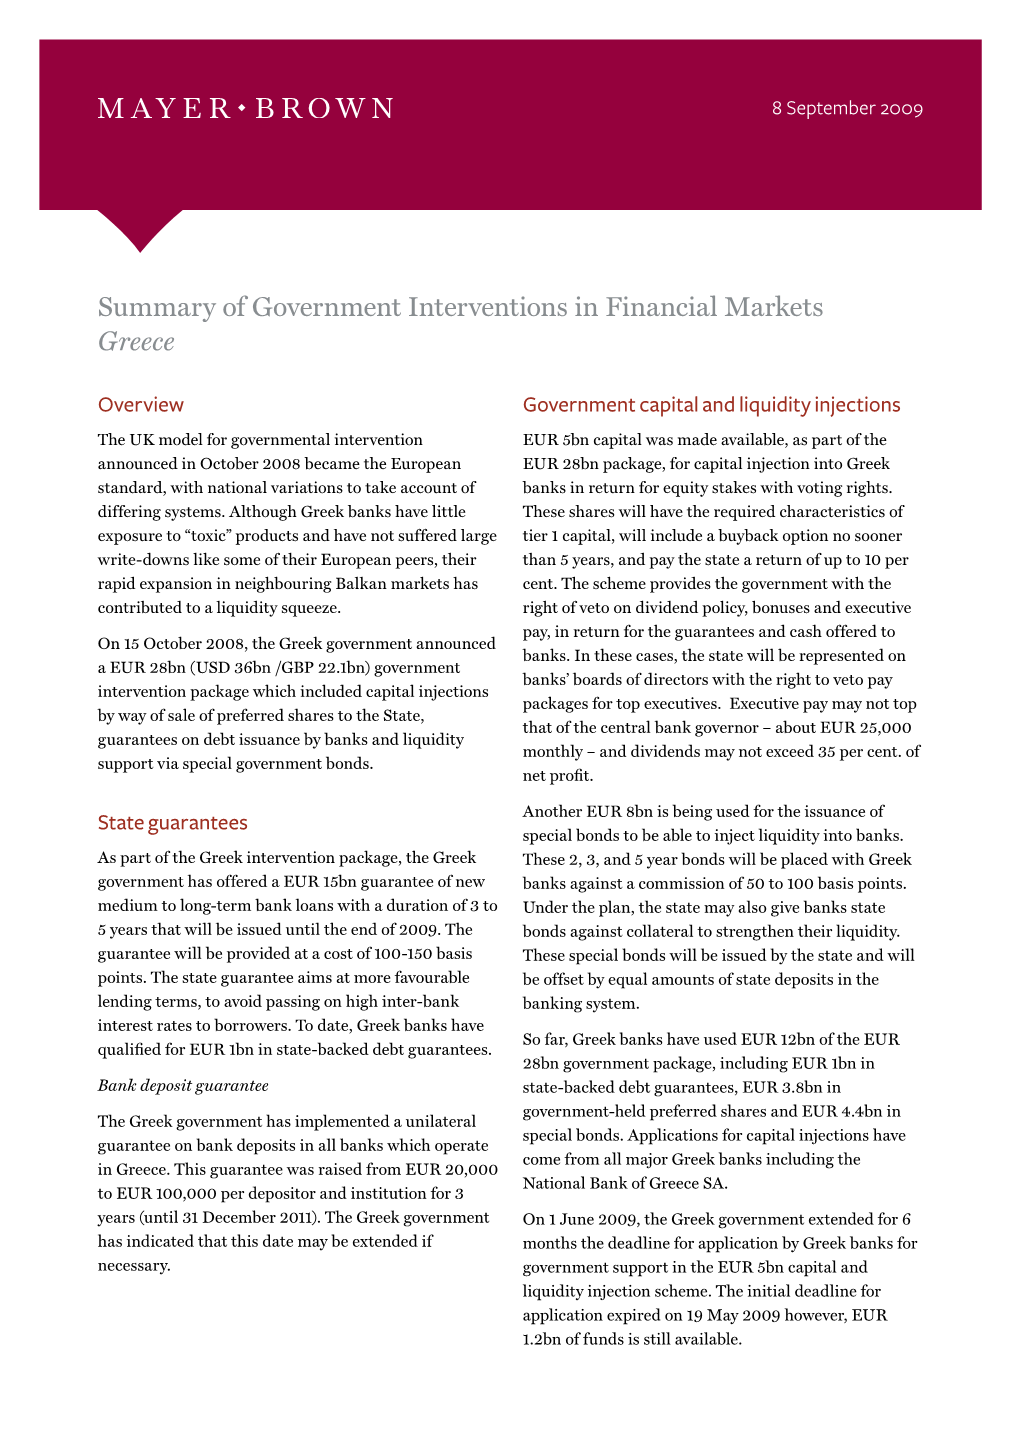 Summary of Government Interventions in Financial Markets Greece